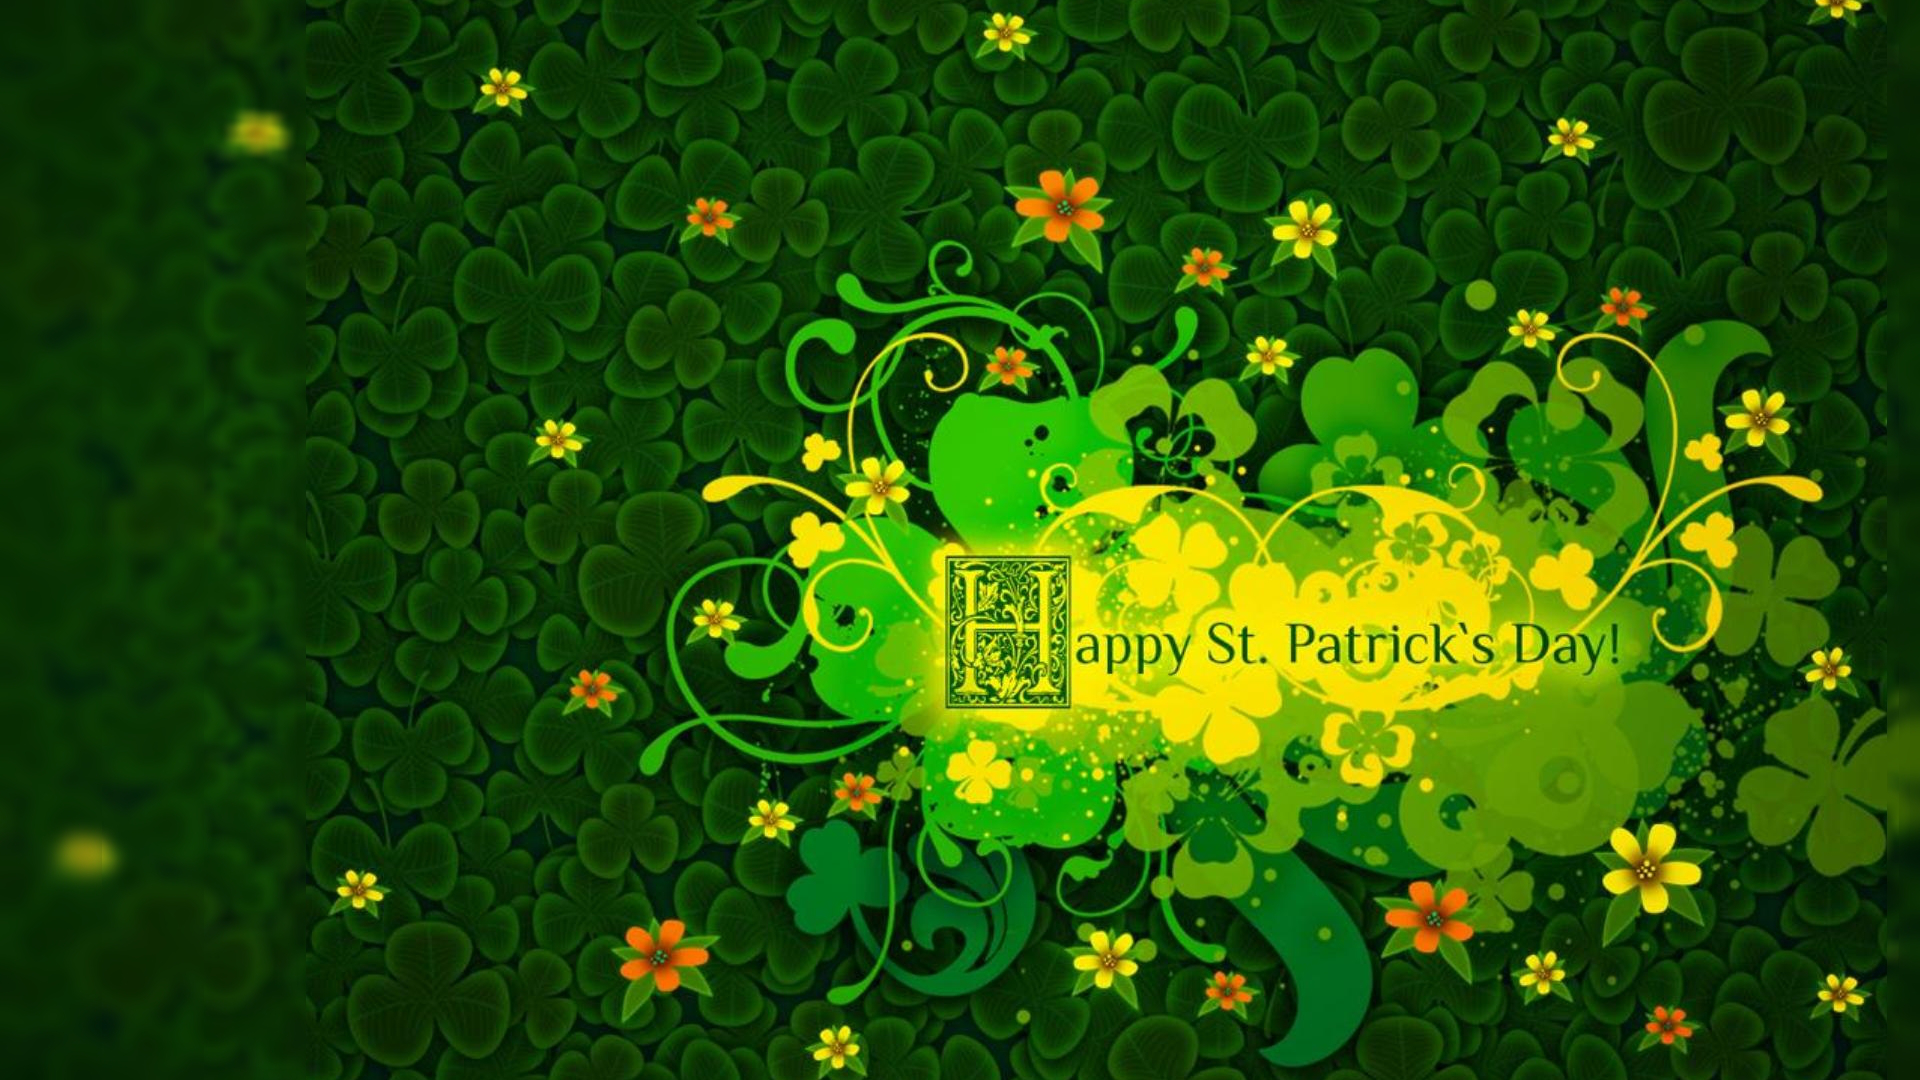 Panoramic Wallpapers St Patrick's Day 